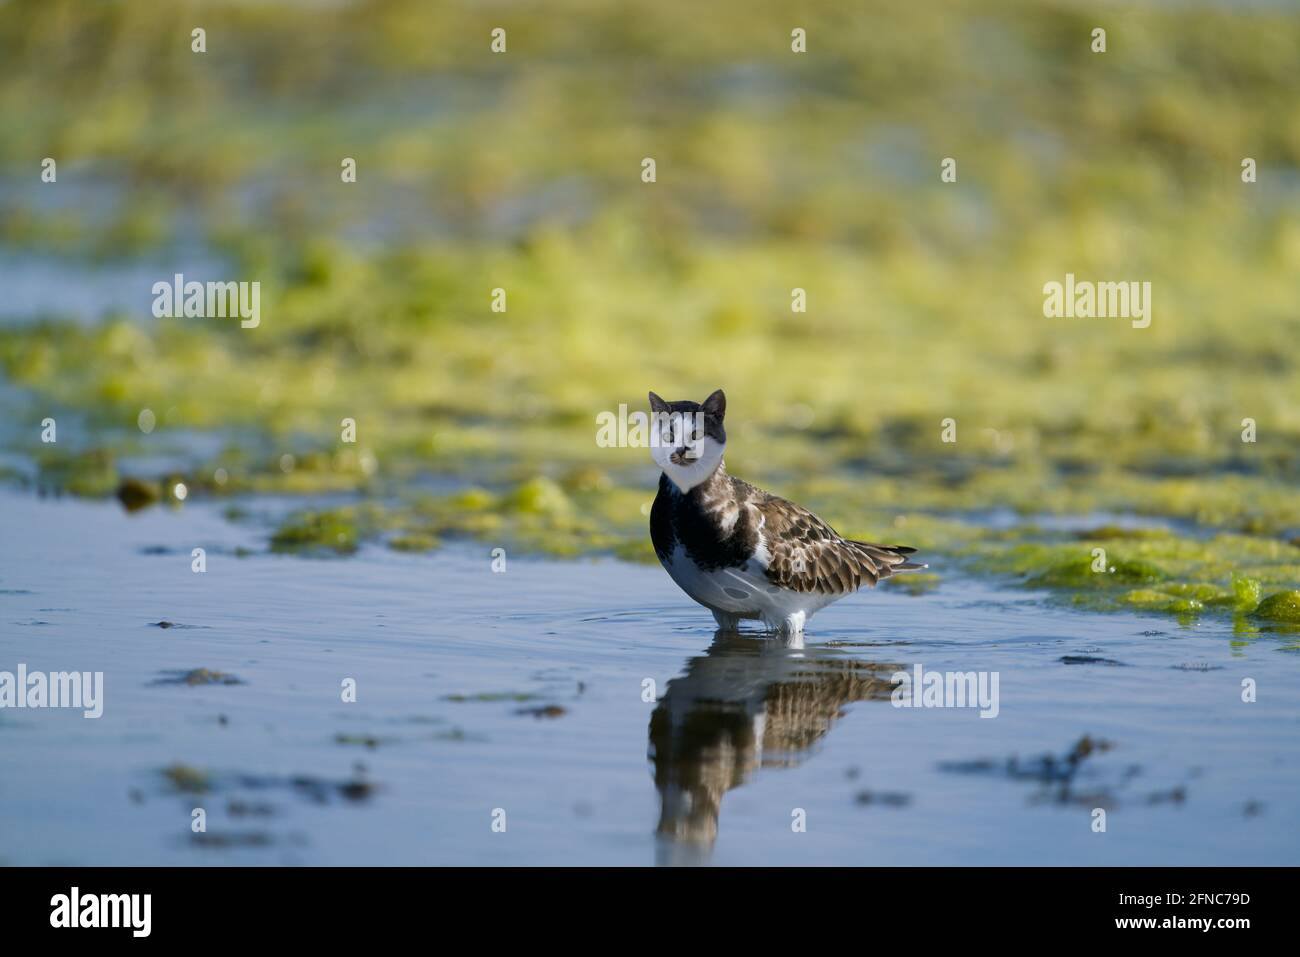 Bird with a cat head standing in a lake Stock Photo